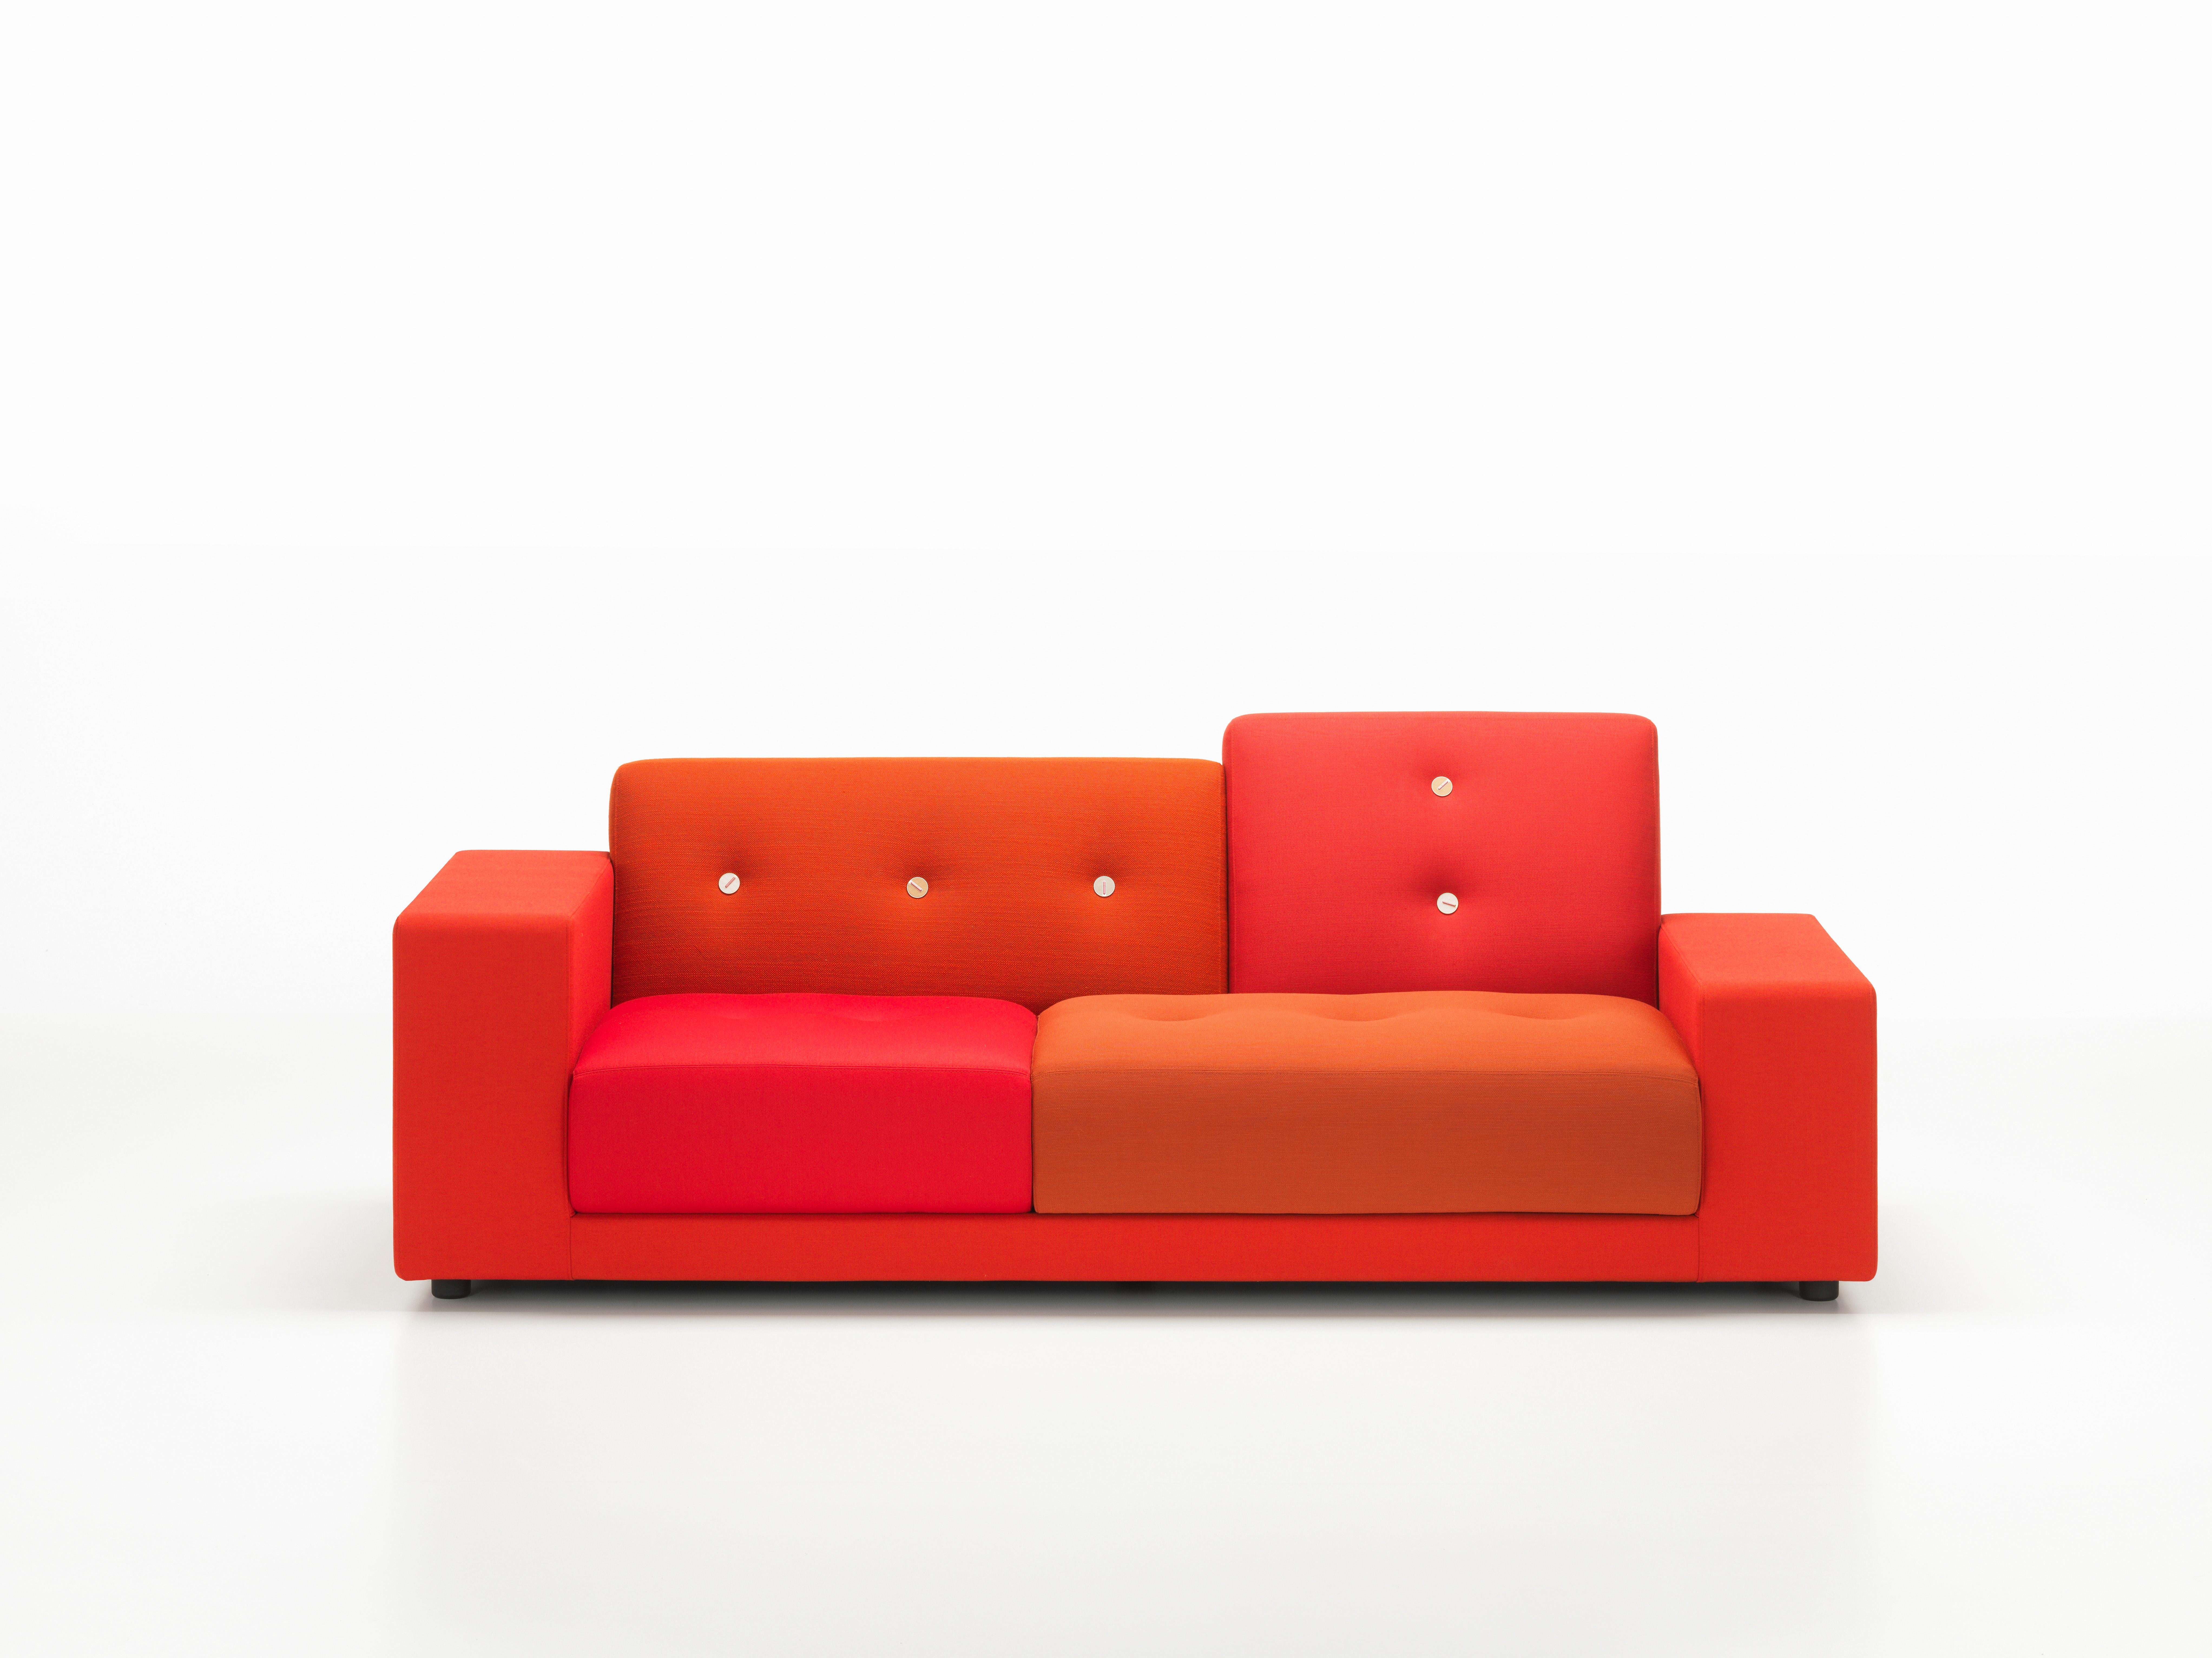 Vitra Polder Compact Sofa in Red Shades by Hella Jongerius (Moderne) im Angebot